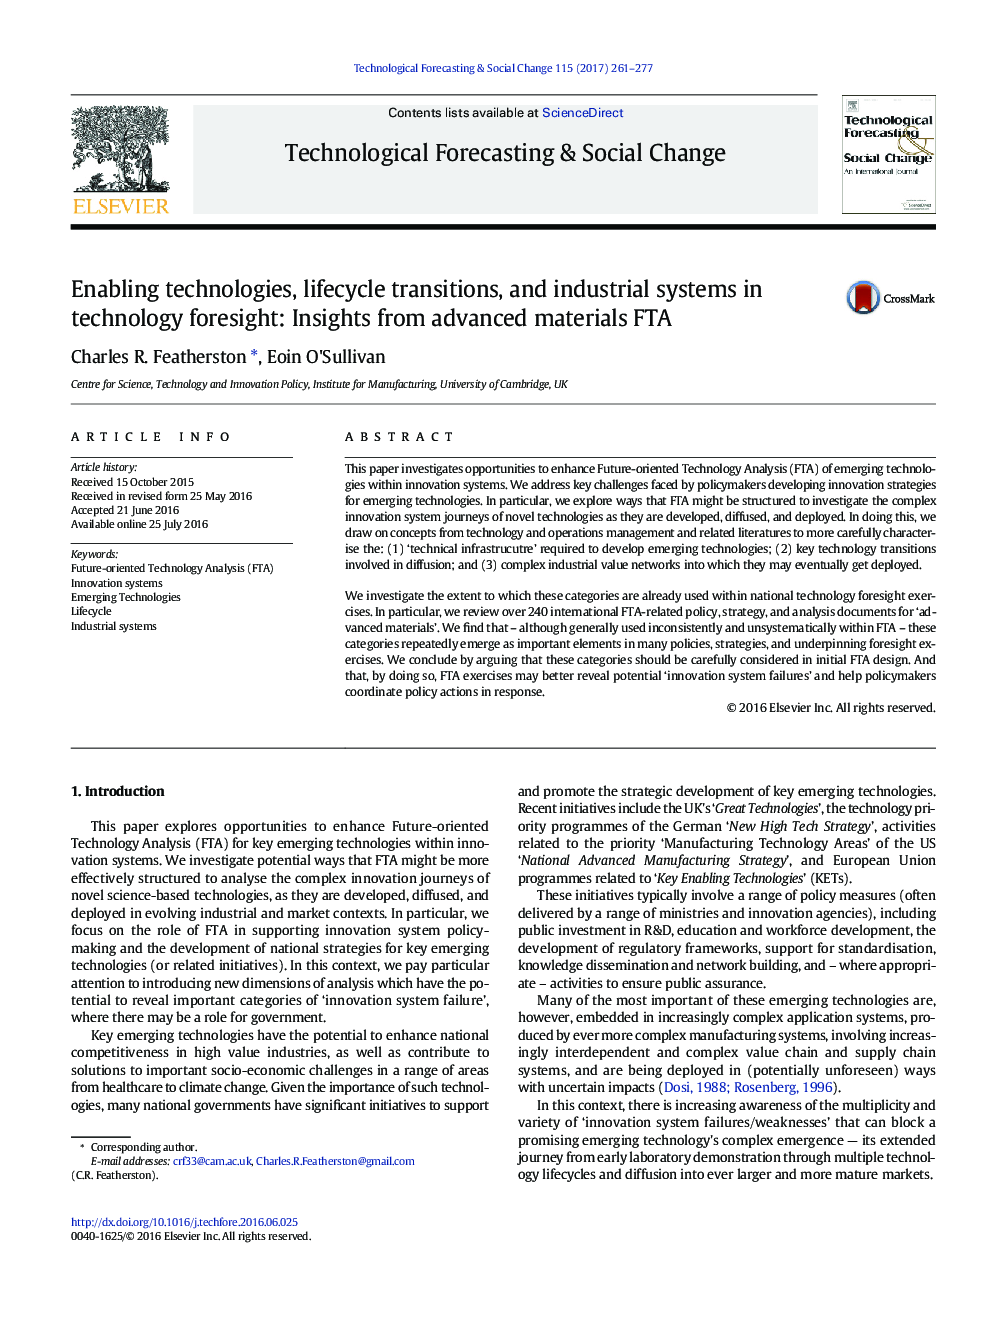 Enabling technologies, lifecycle transitions, and industrial systems in technology foresight: Insights from advanced materials FTA